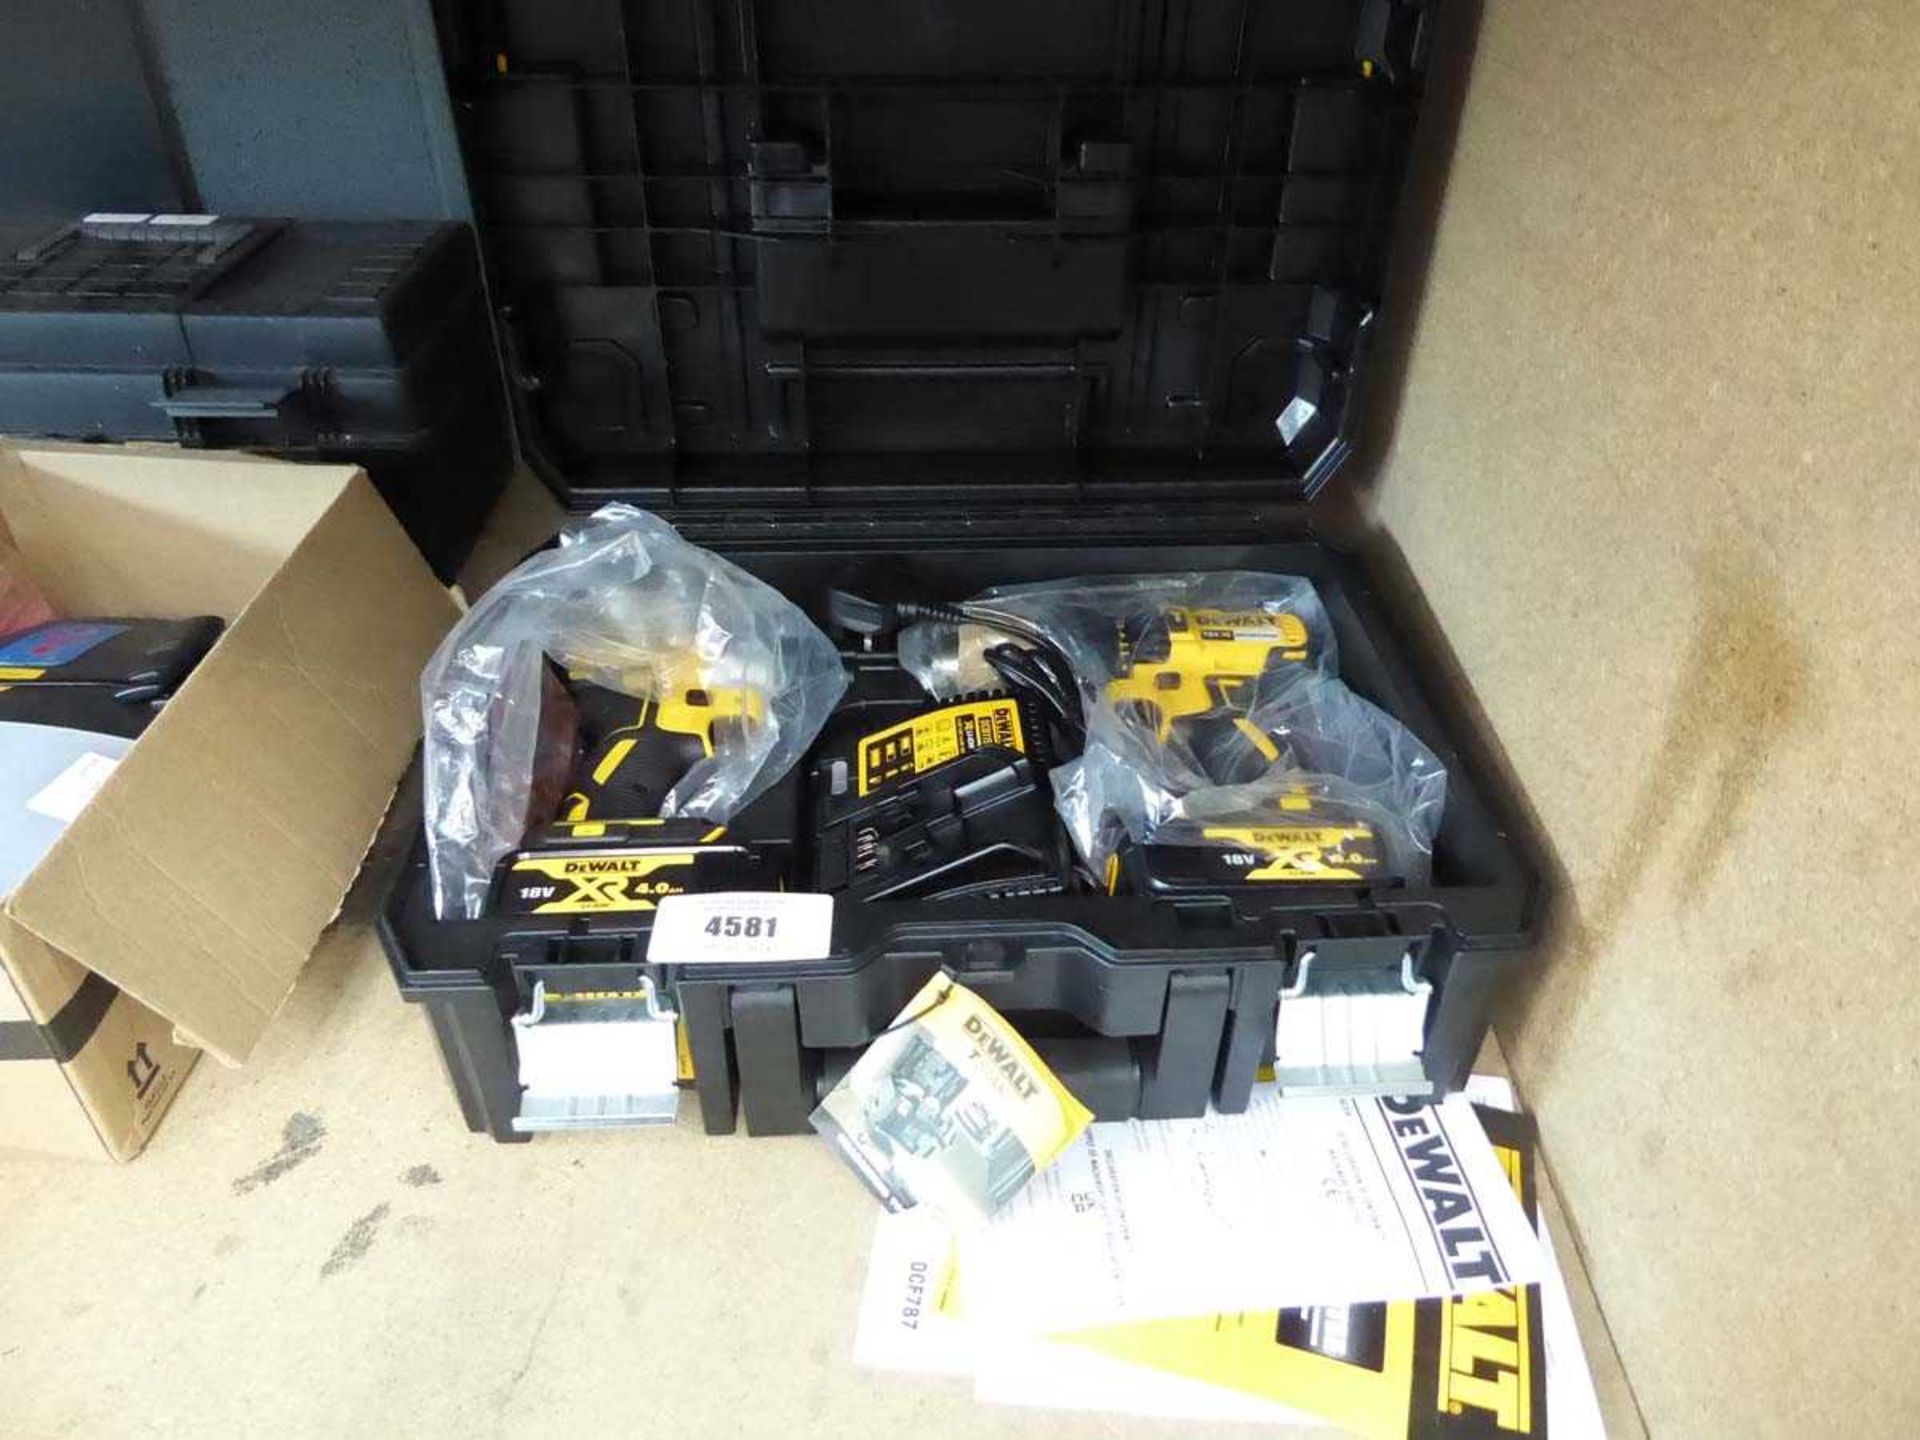 +VAT DeWalt drill and impact drive set with 2 batteries and charger